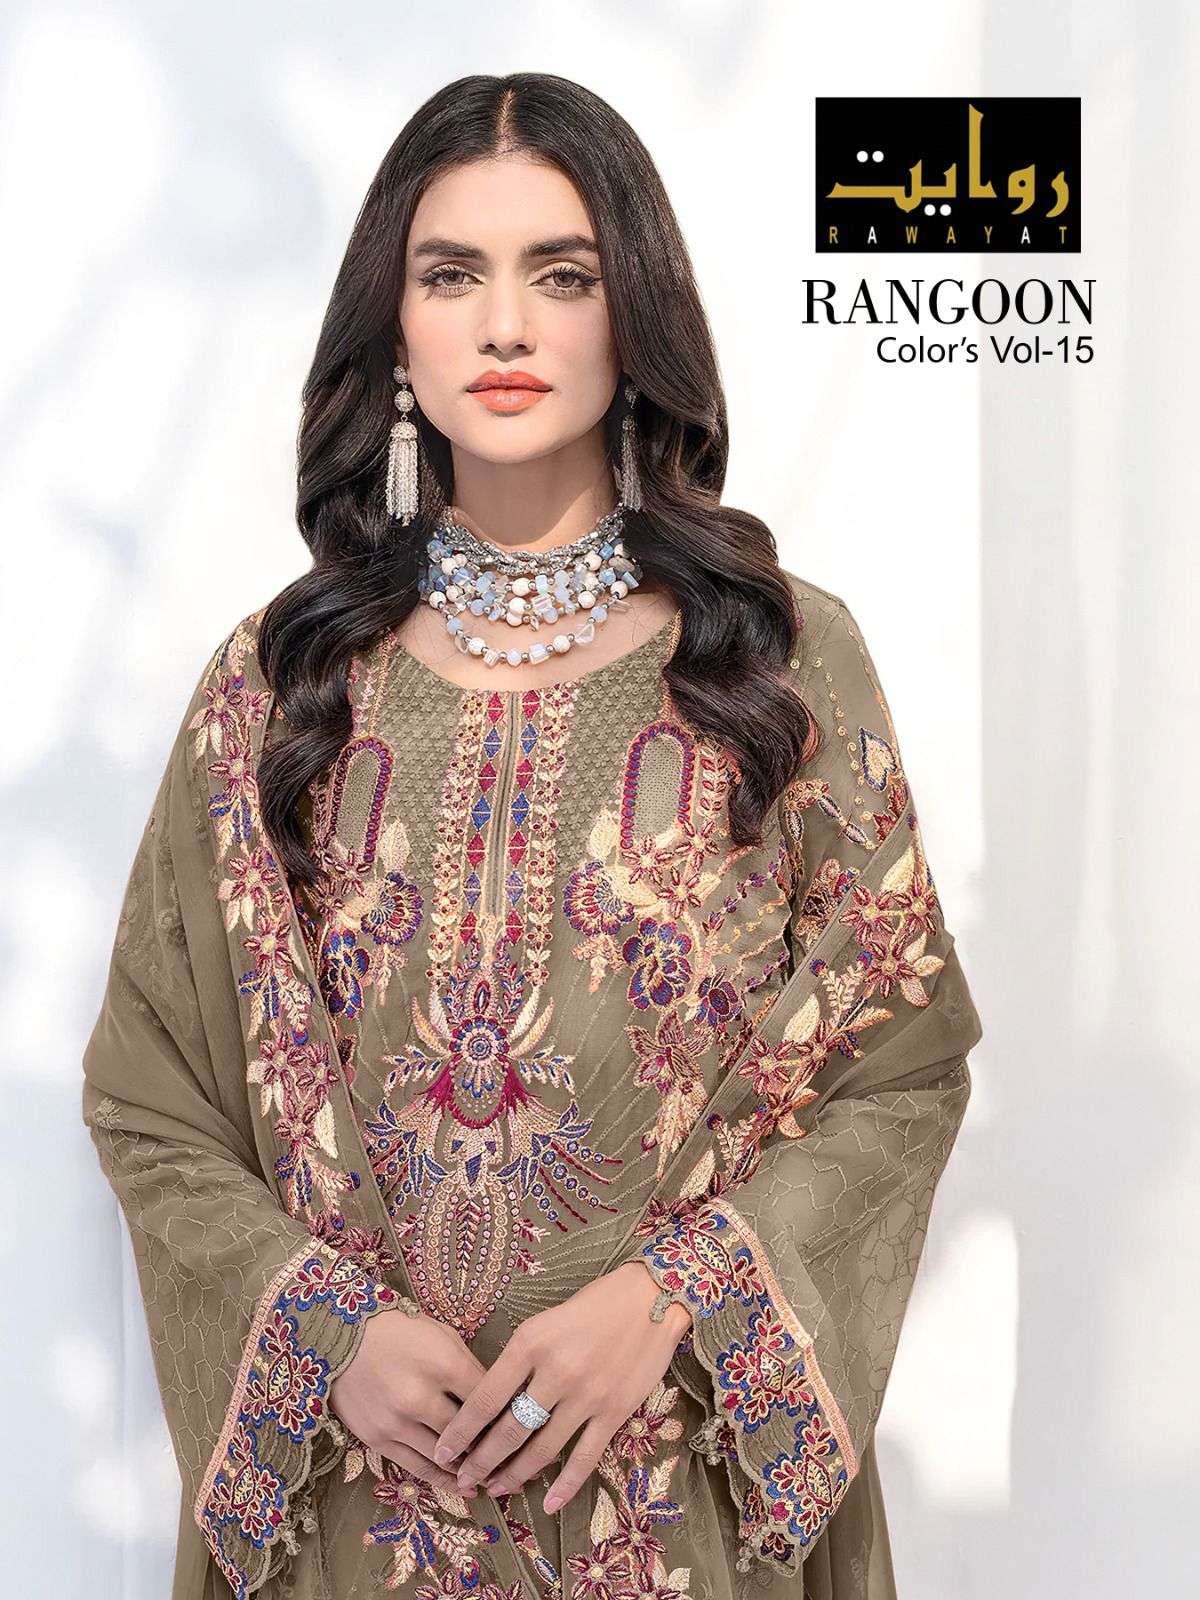 RAWAYAT RANGOON COLORS VOL 15 FAUX GEORGETTE WITH EMBROIDERY...